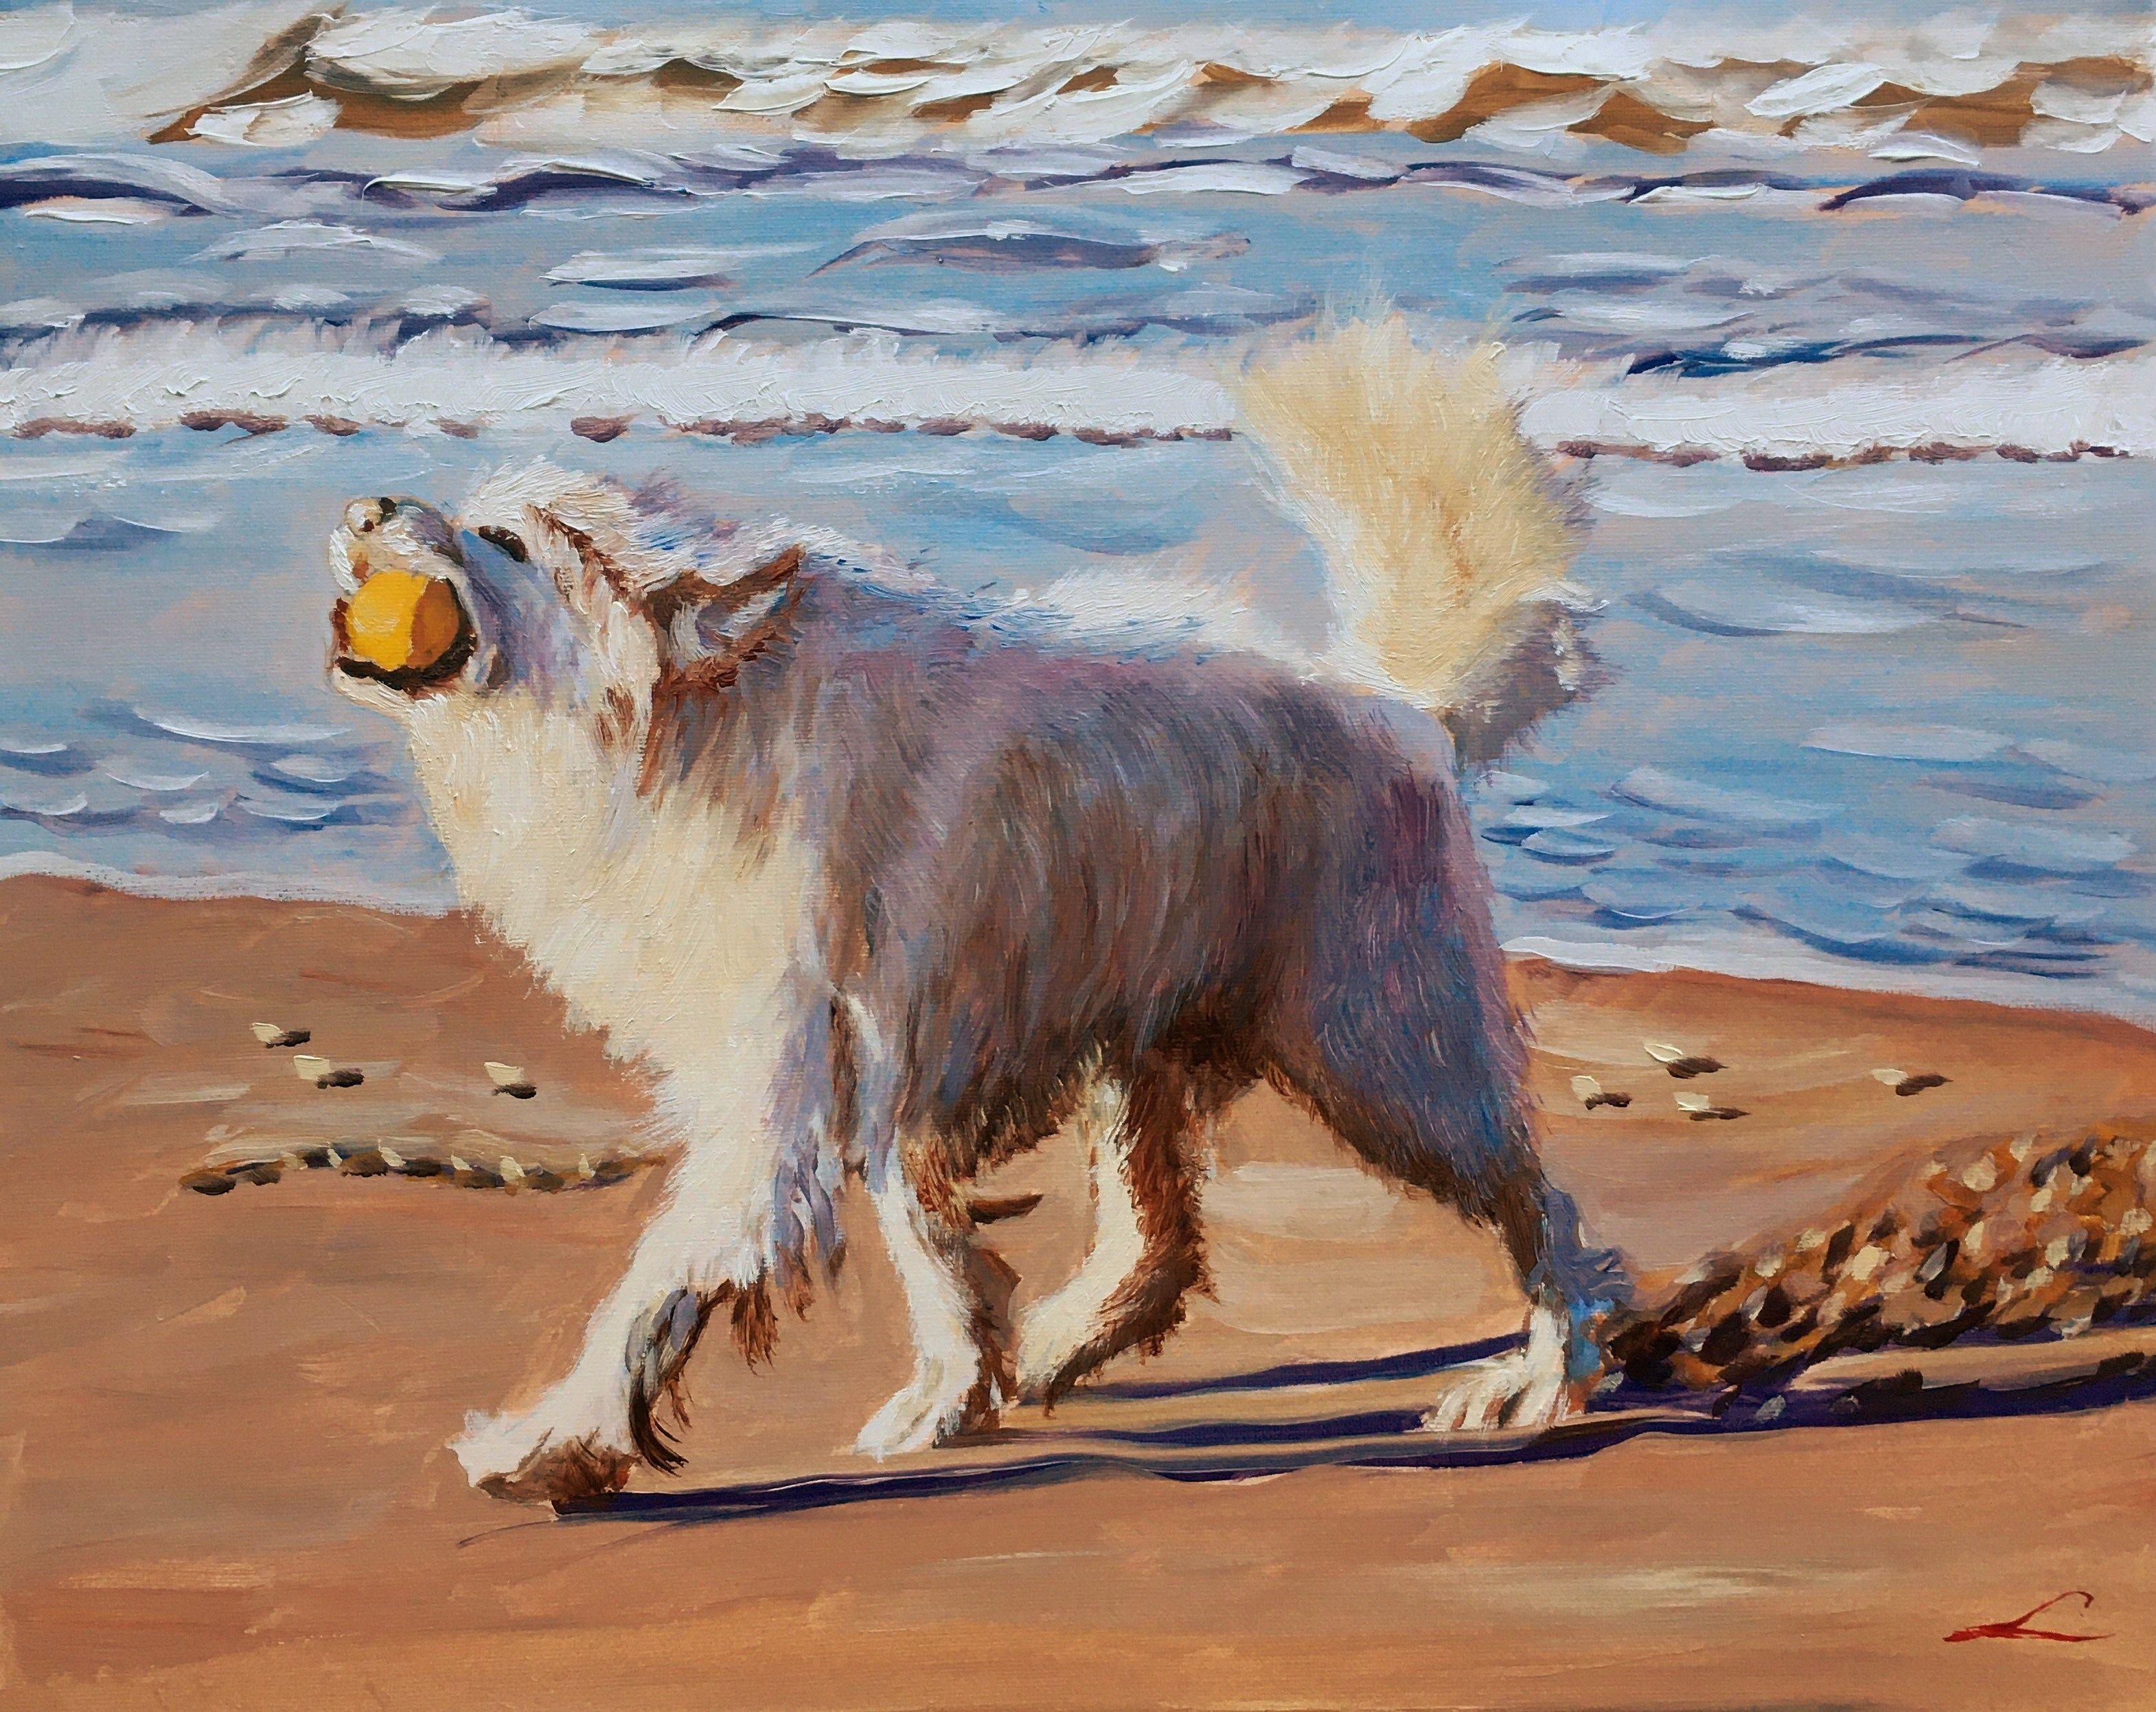 Wet dog, Painting, Oil on Canvas